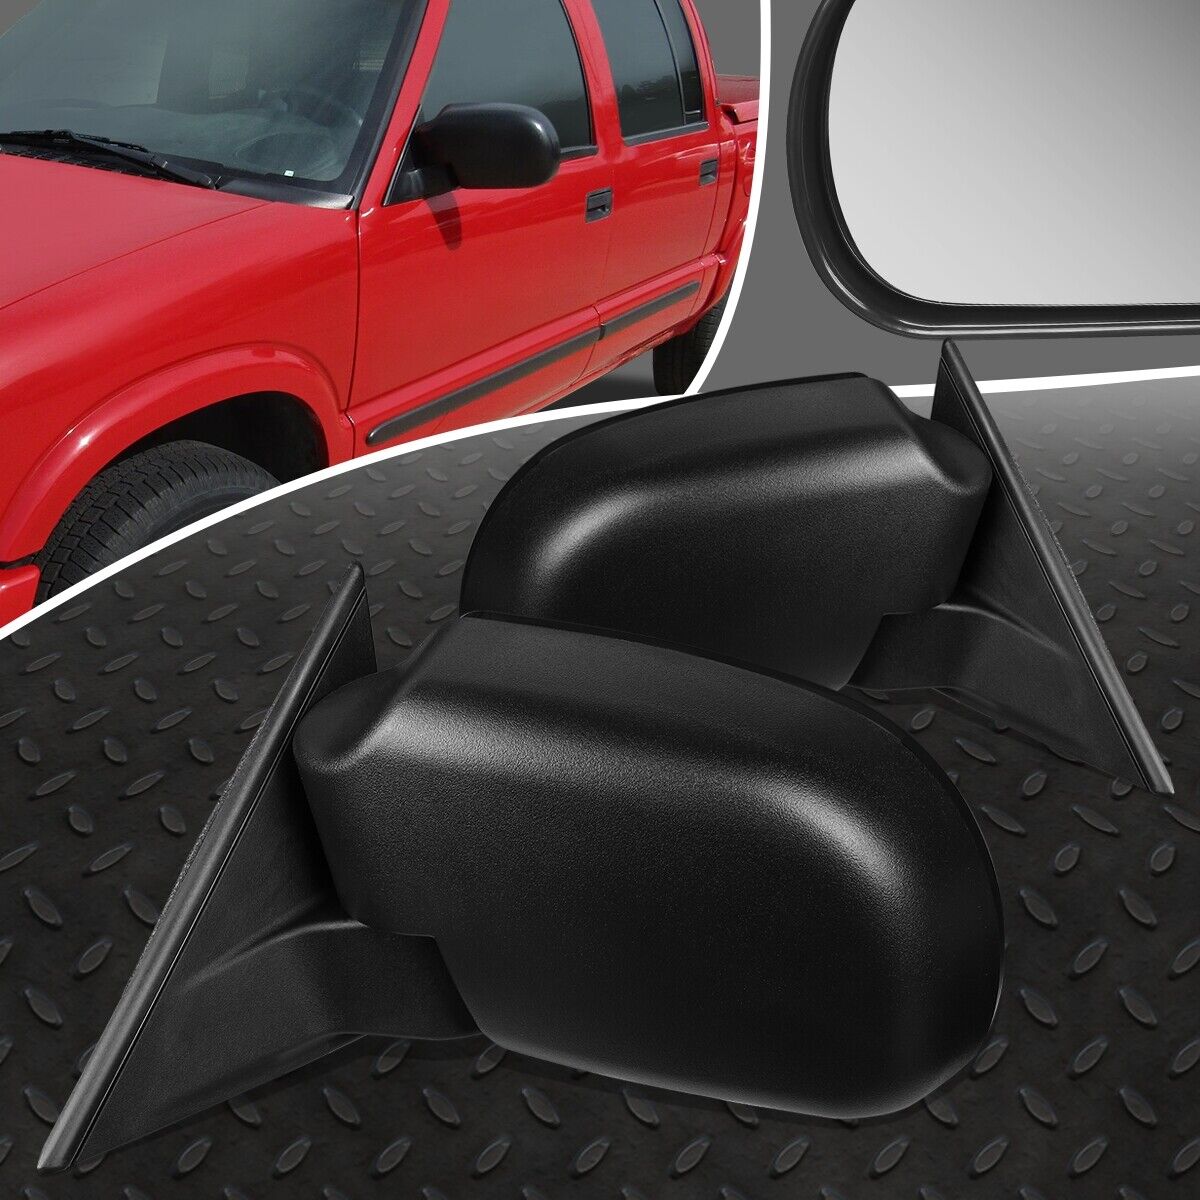 FOR 98-04 CHEVY S10 PICKUP GMC SONOMA PAIR OE STYLE MANUAL SIDE VIEW DOOR MIRROR